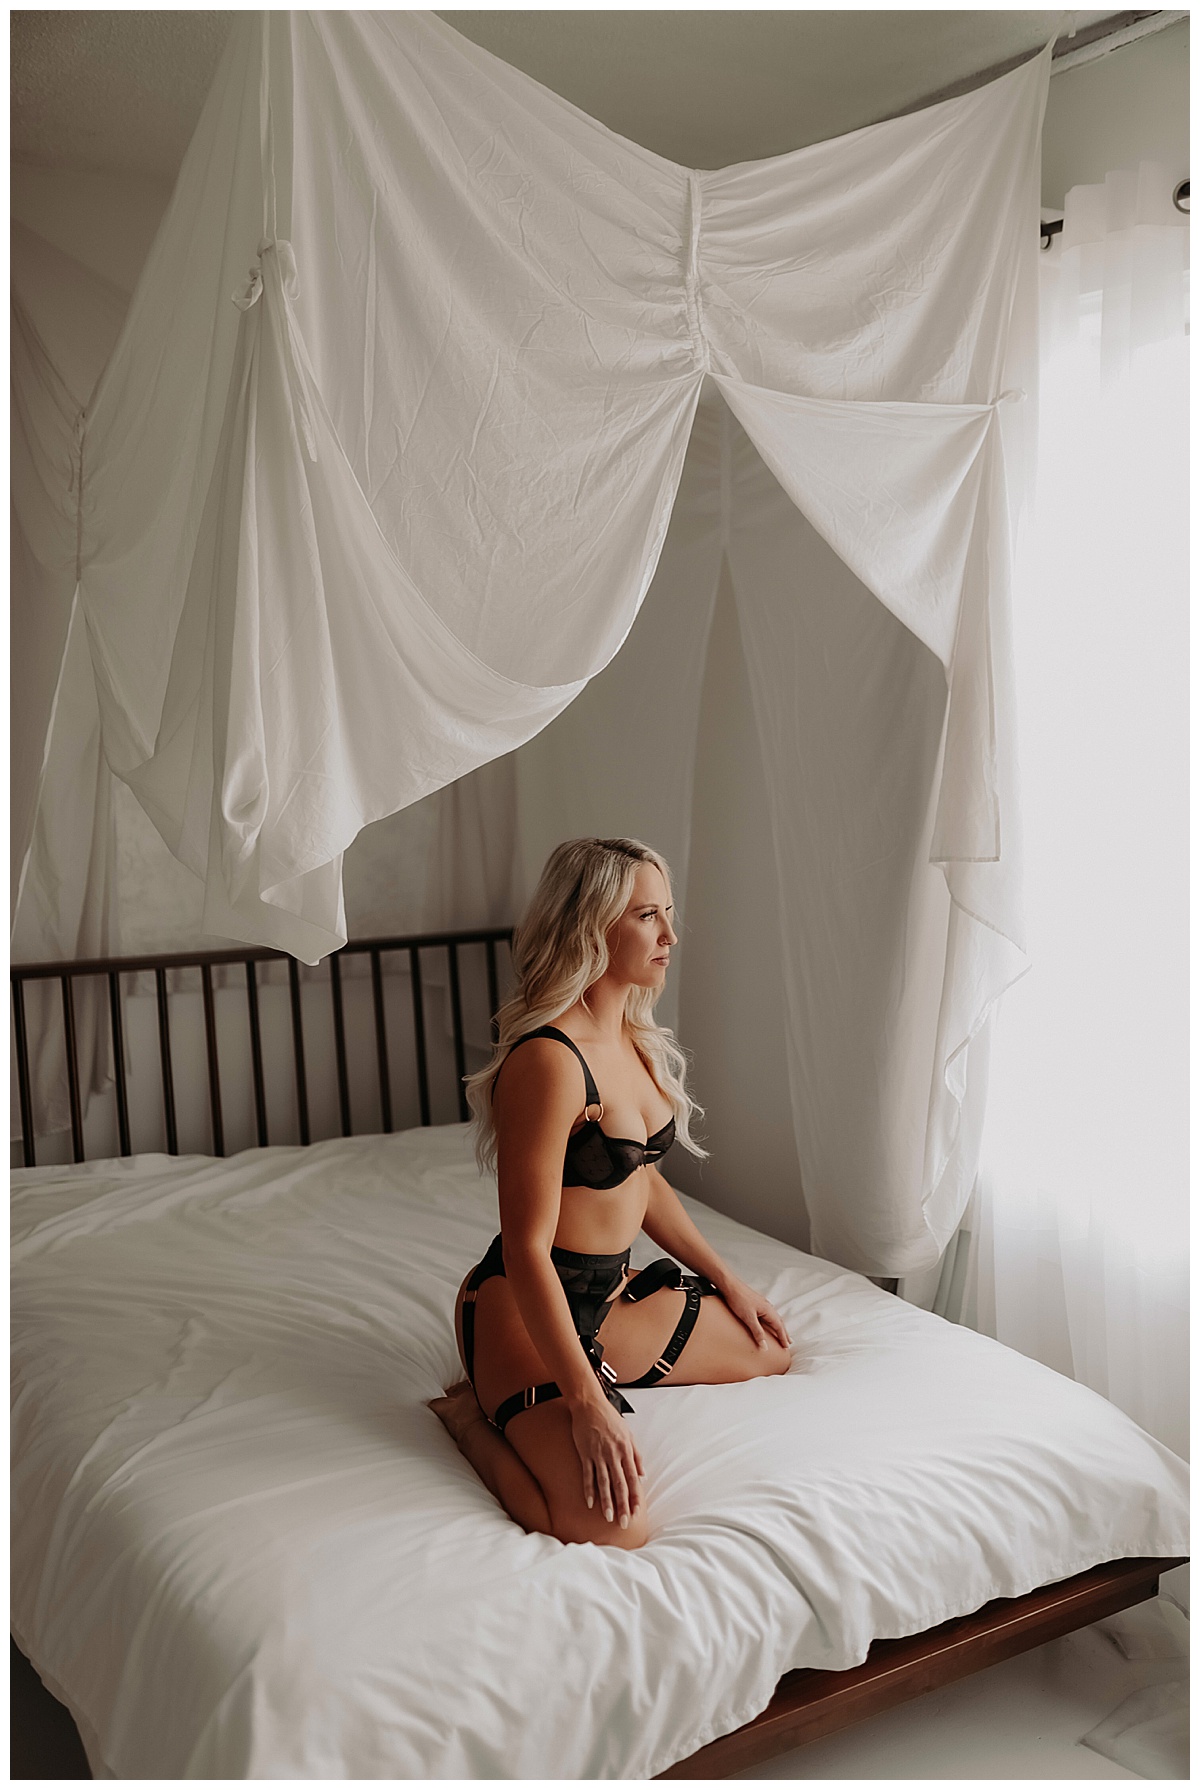 Woman sits on bed wearing Strappy Lingerie